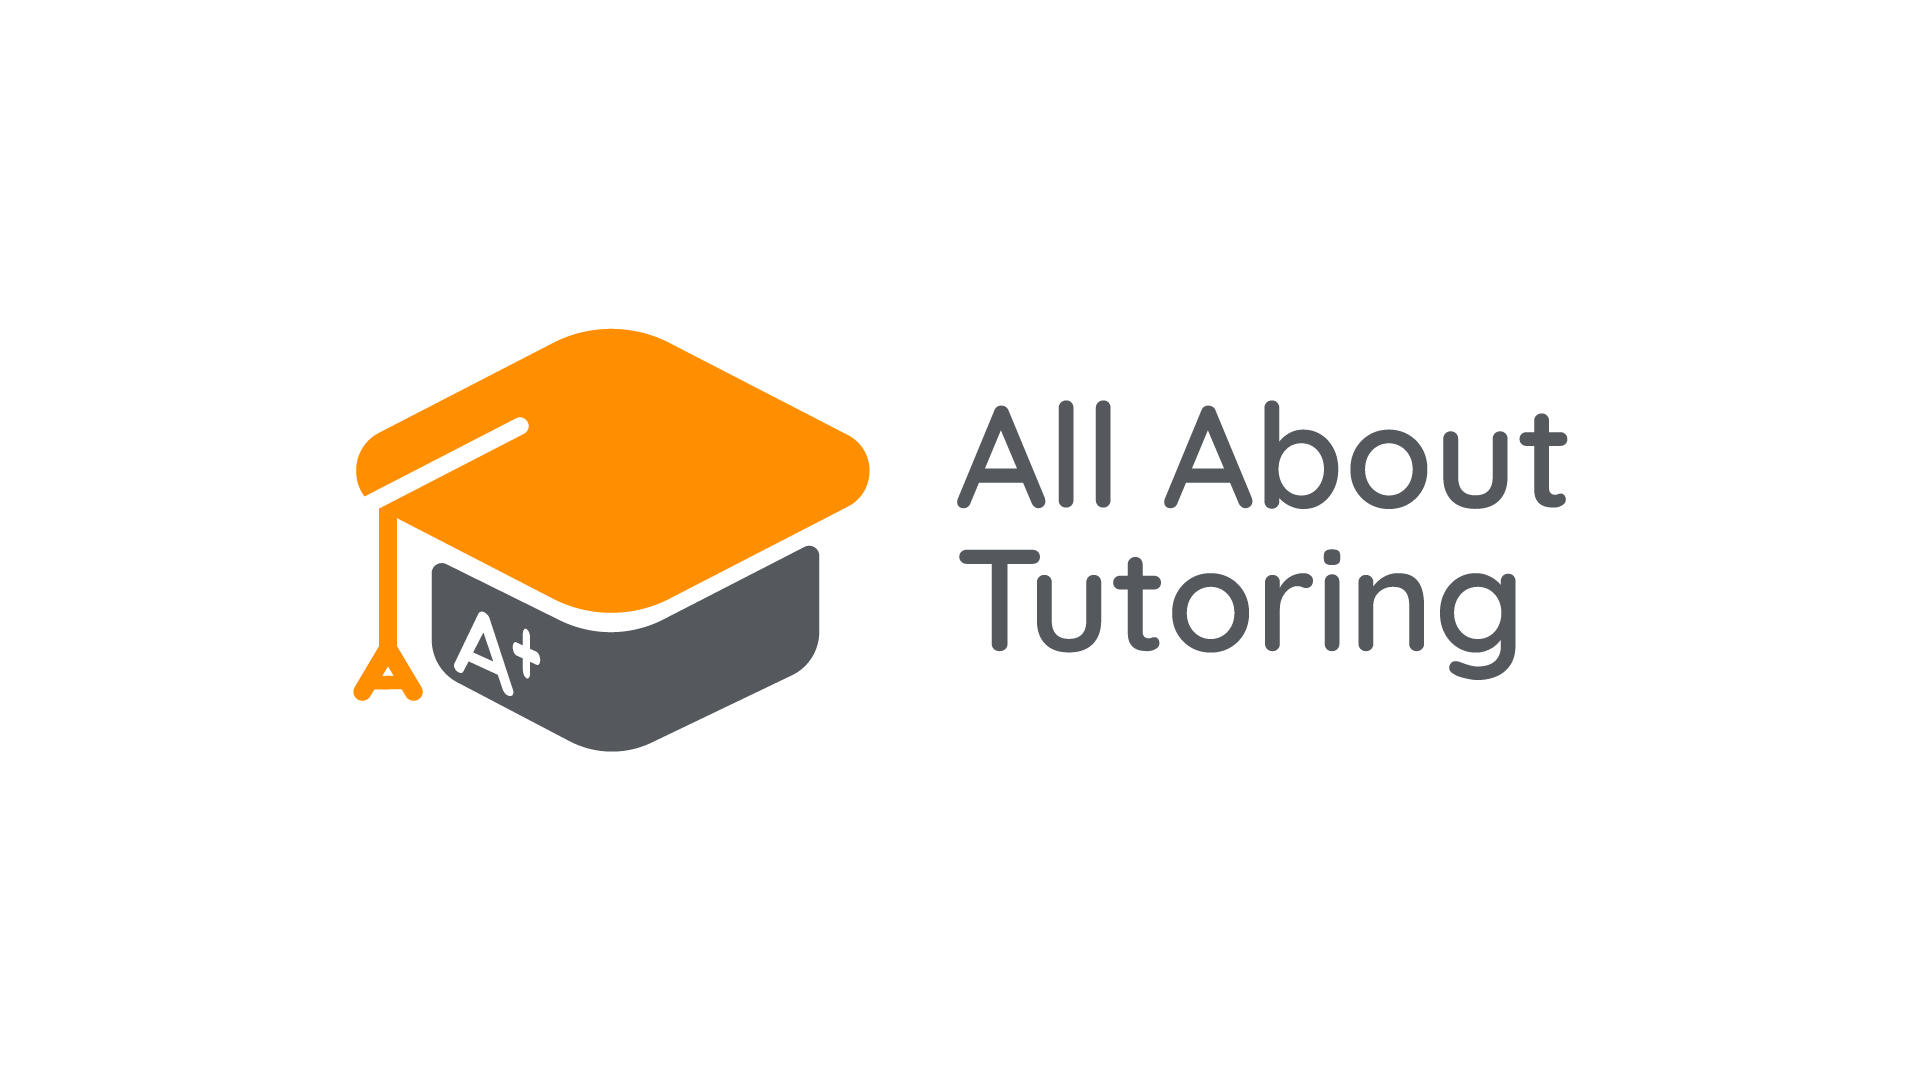 All About Tutoring